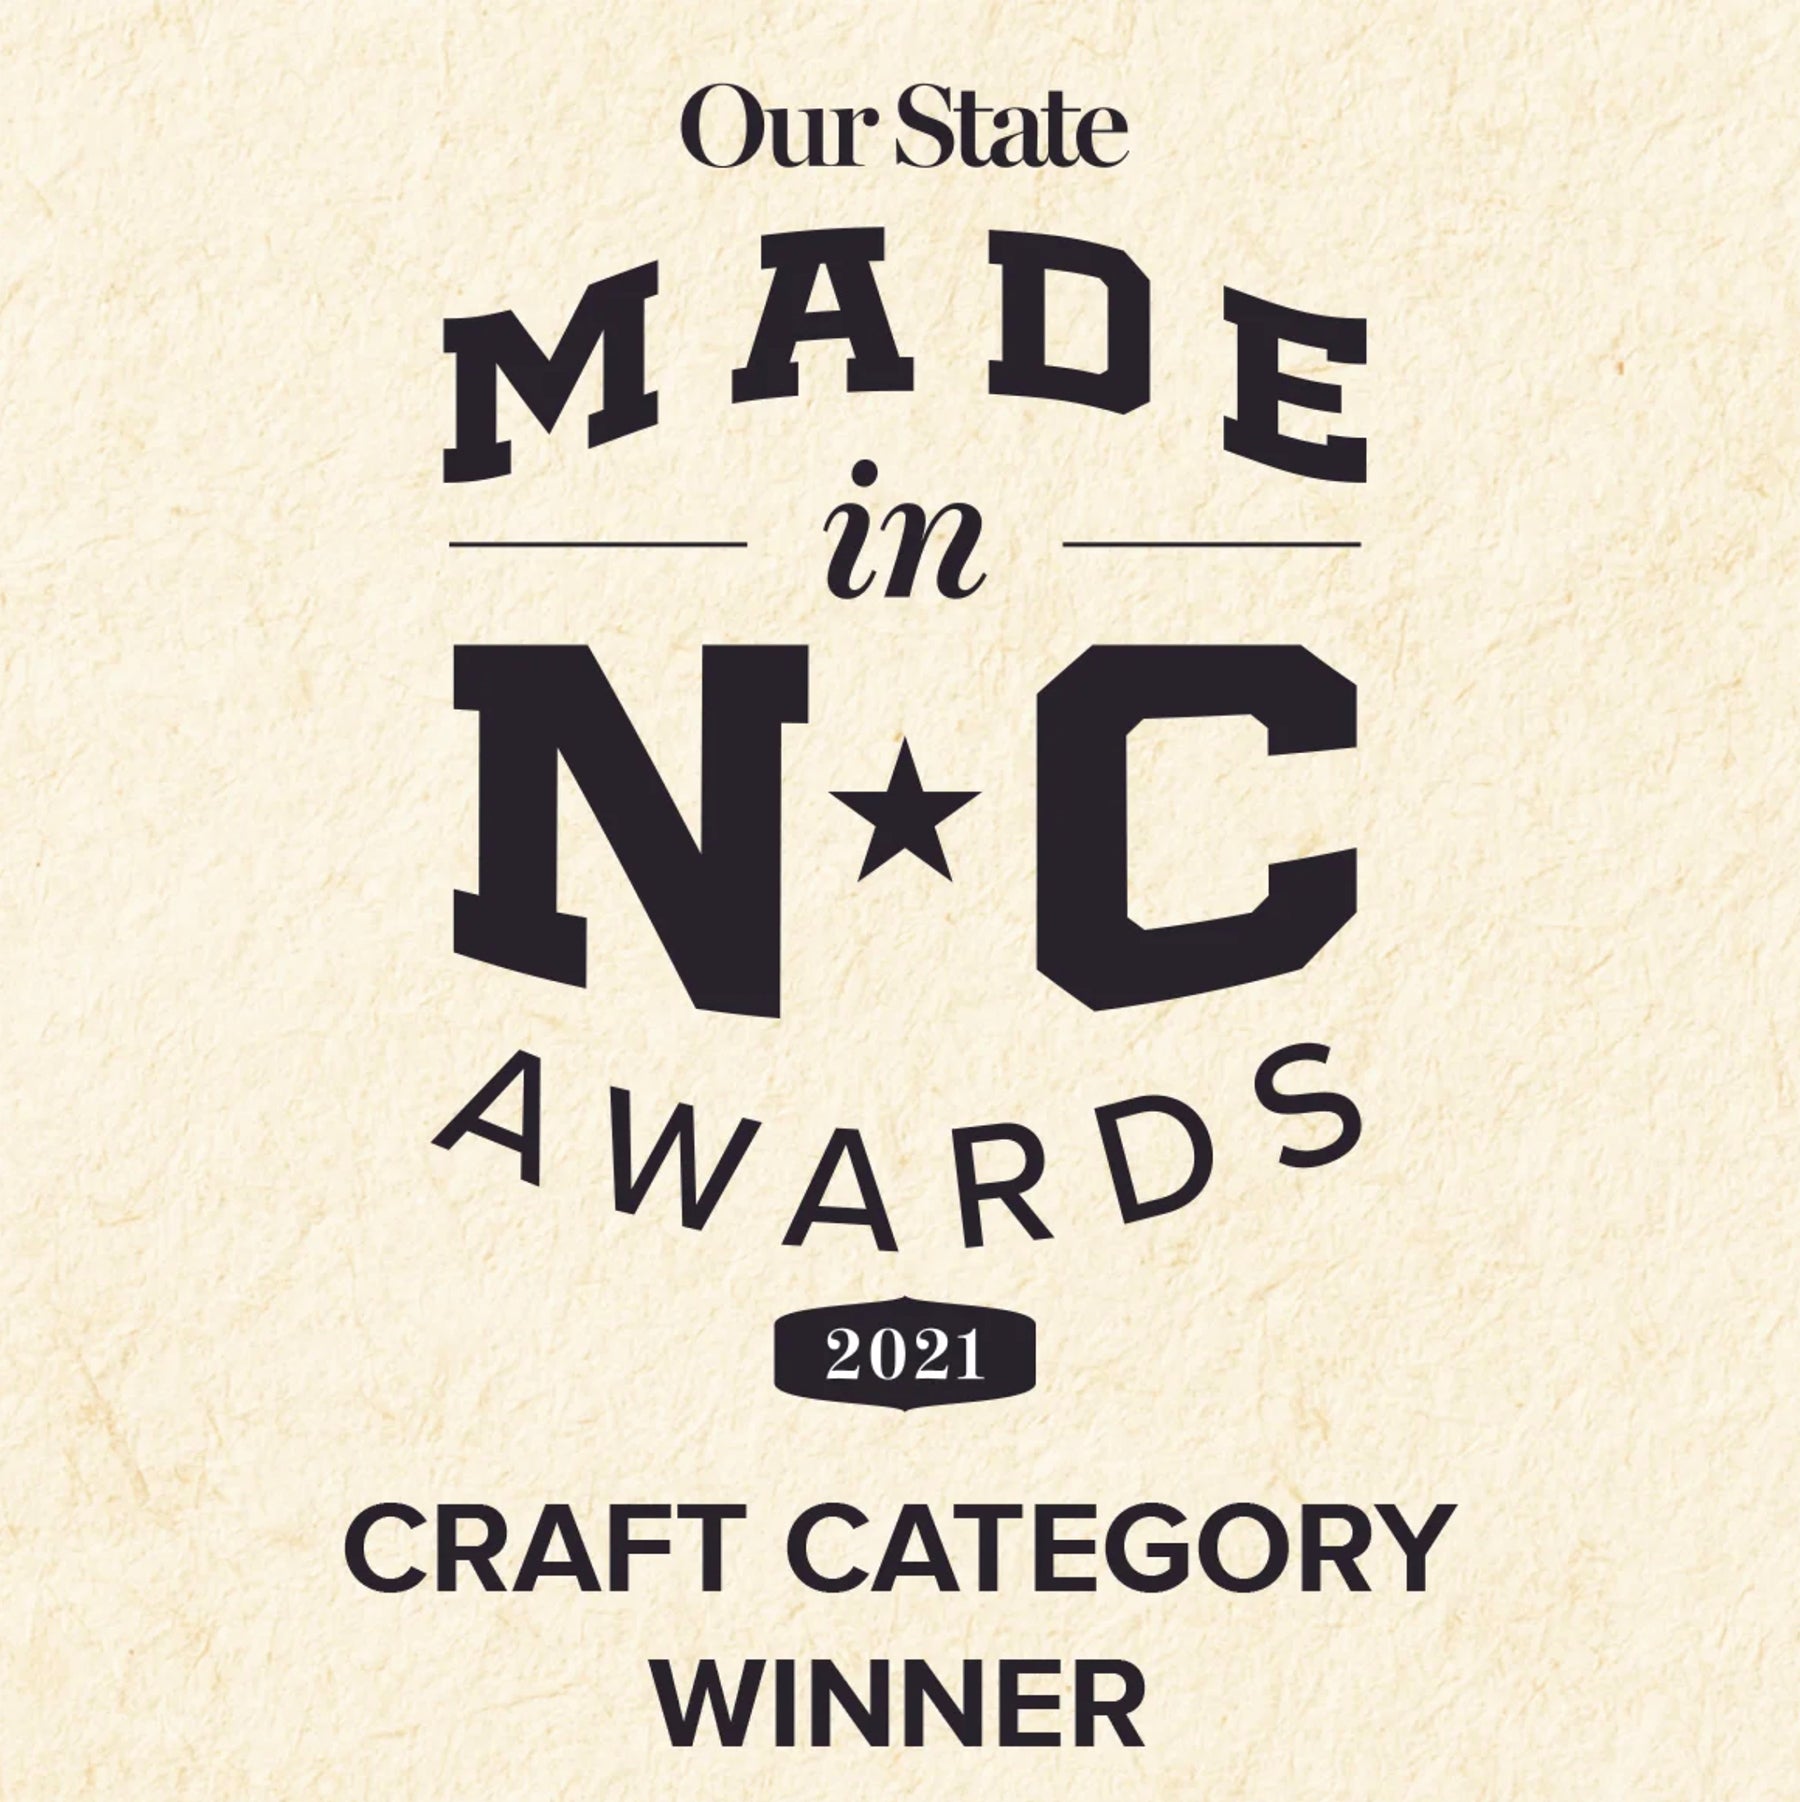 Our State "Made in NC" logo for the 2021 craft category winner